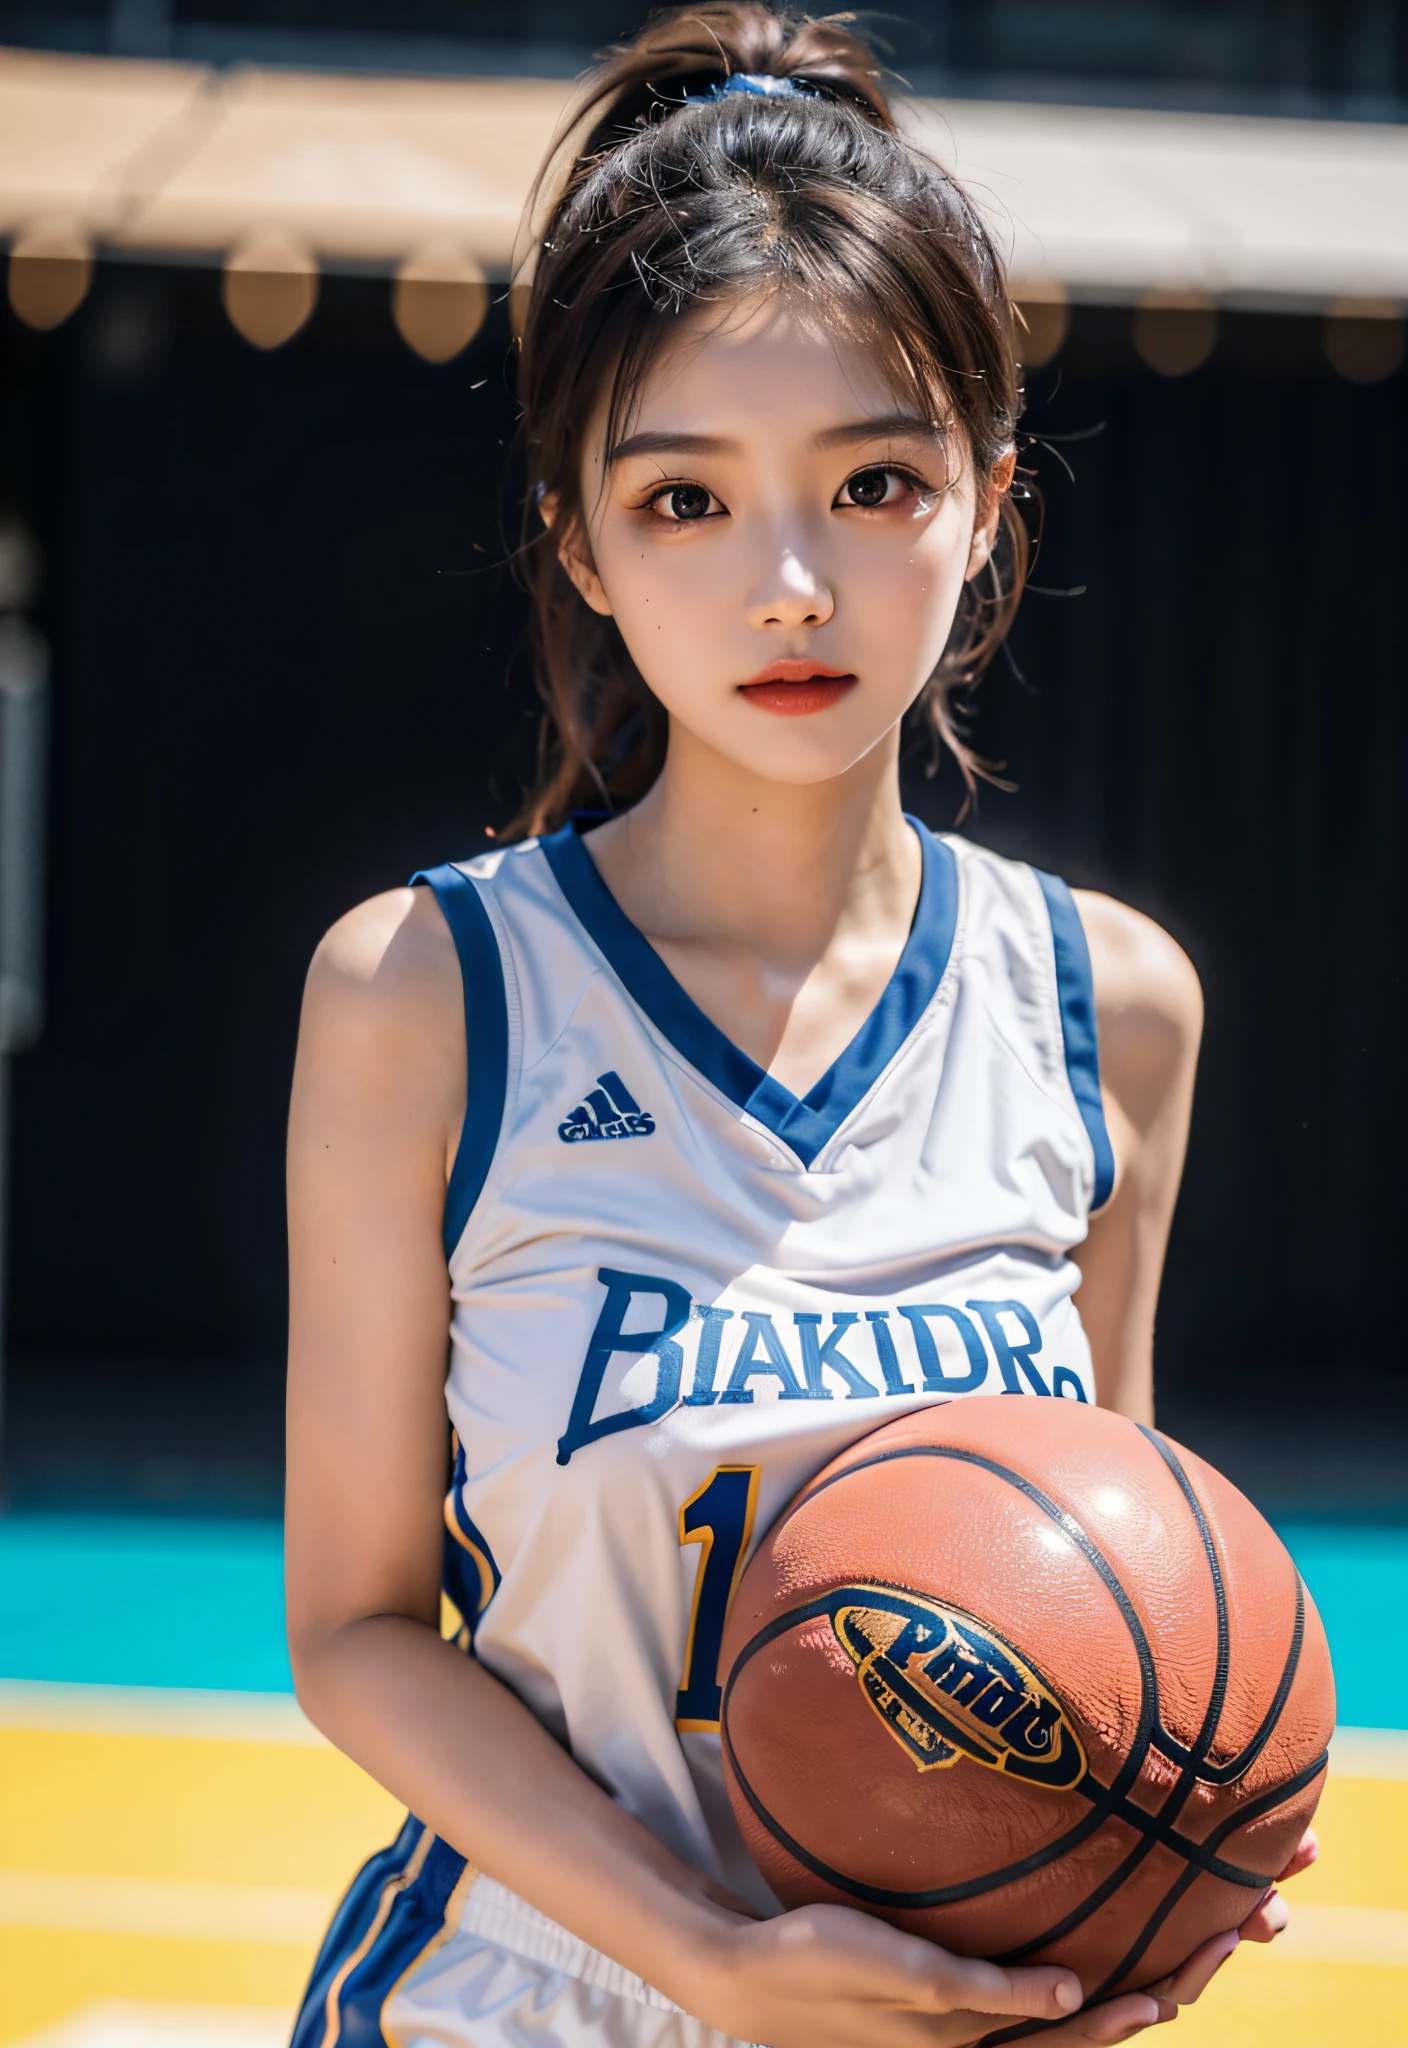 （ best qualtiy， tmasterpiece：1.2），A high resolution，4K,1girll，solo，Delicate face，real looking skin，Dynamic light and shadow,Sharp focus,depth of fields,The eyes are delicate,pupil realistic, Playful expression， wear basketball uniform，（perfect bodies），（Big breasted 1.1），basketball playground，realisticlying, ultra - detailed, (shiny skins, perspired:1.4), looking at viewert,